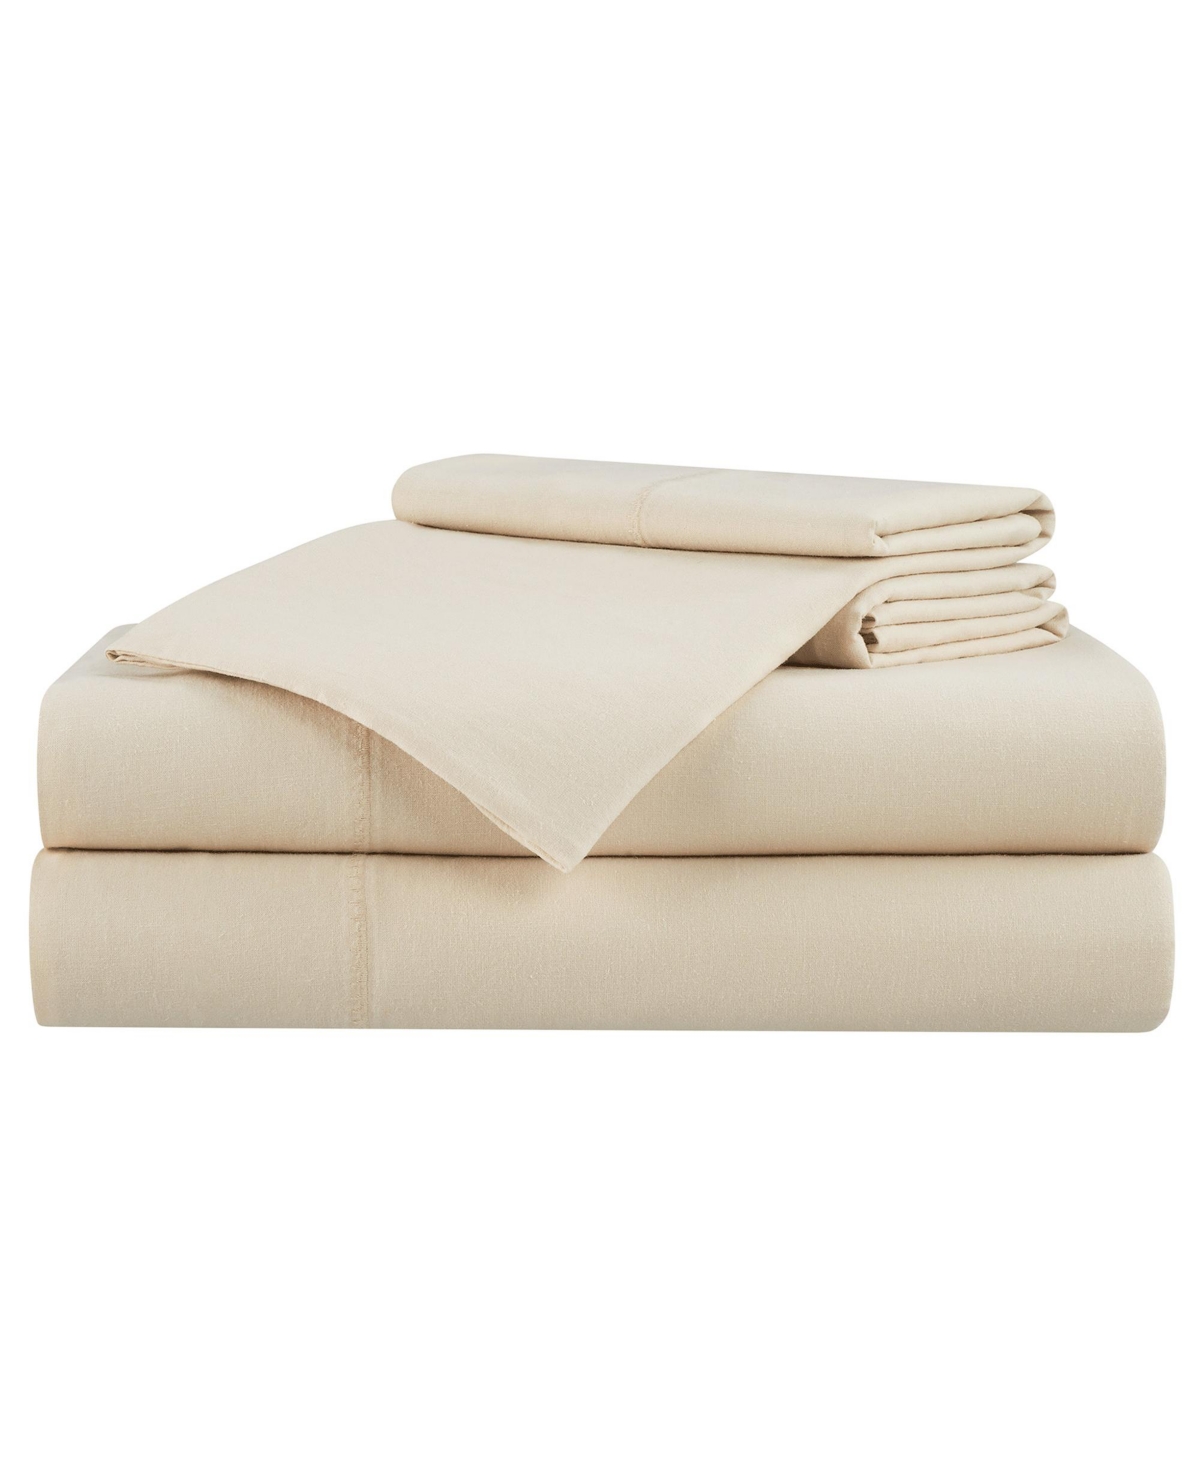 Aston And Arden Linen And Eucalyptus Lyocell California King Sheet Set, 1 Flat Sheet, 1 Fitted Sheet, 2 Pillowcases, In Beige